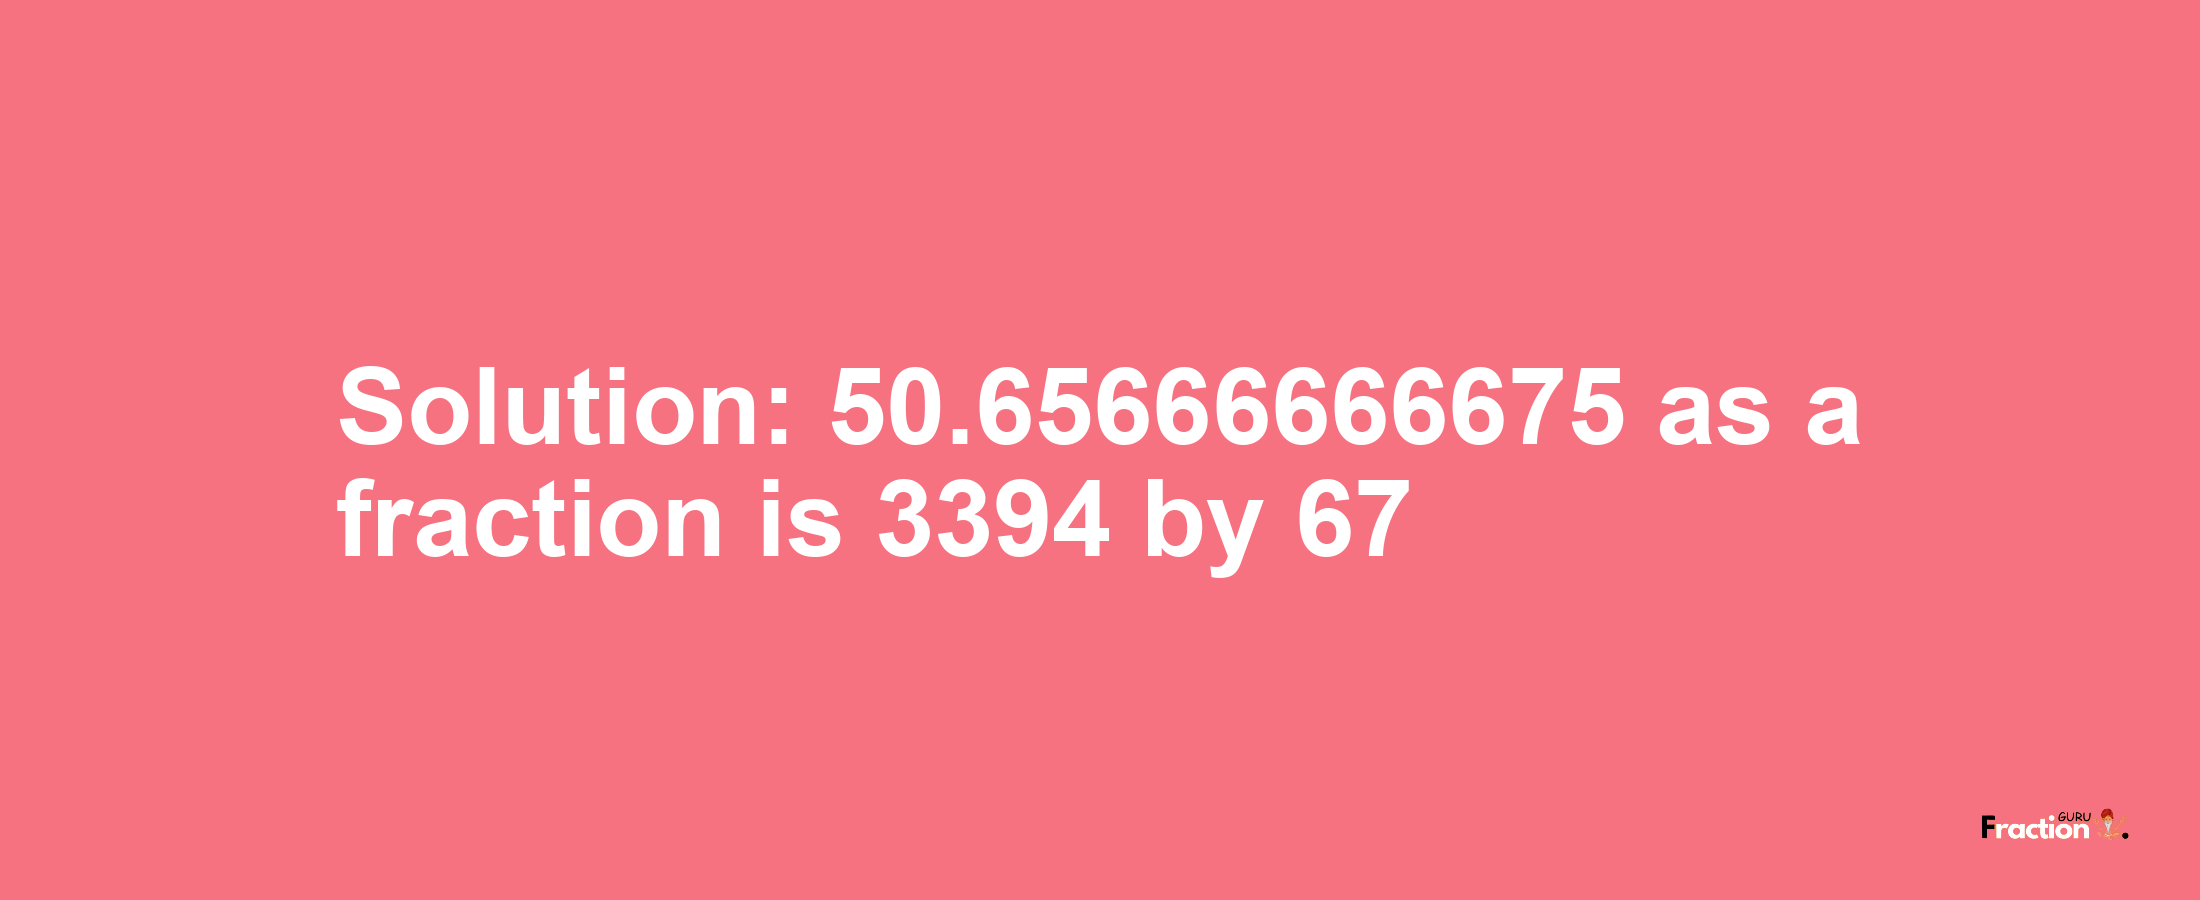 Solution:50.65666666675 as a fraction is 3394/67